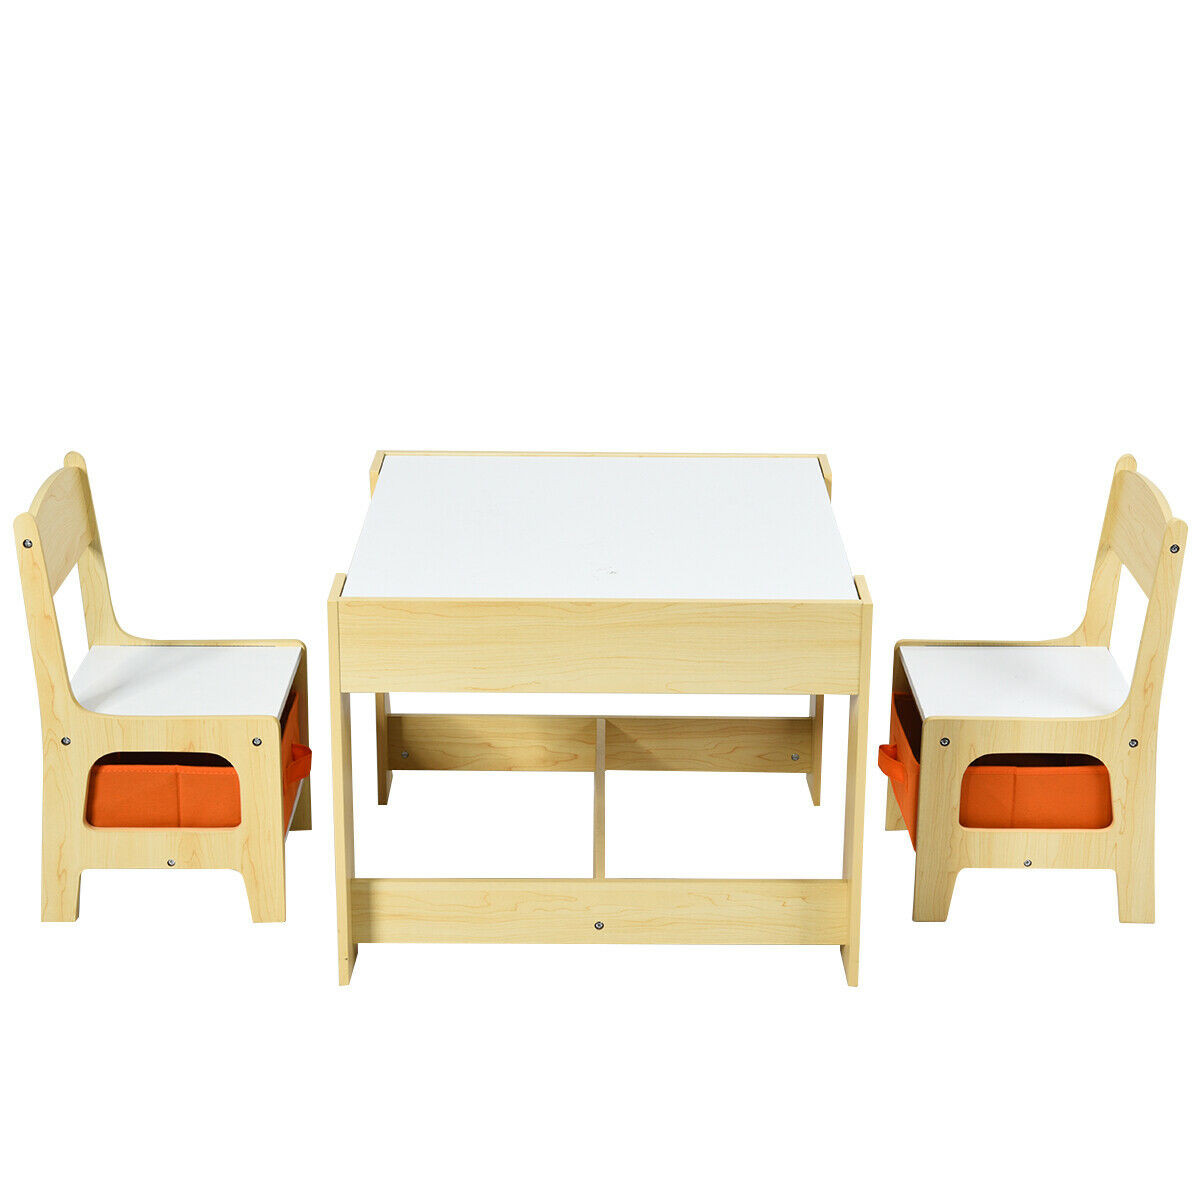 childrens table and chairs with storage